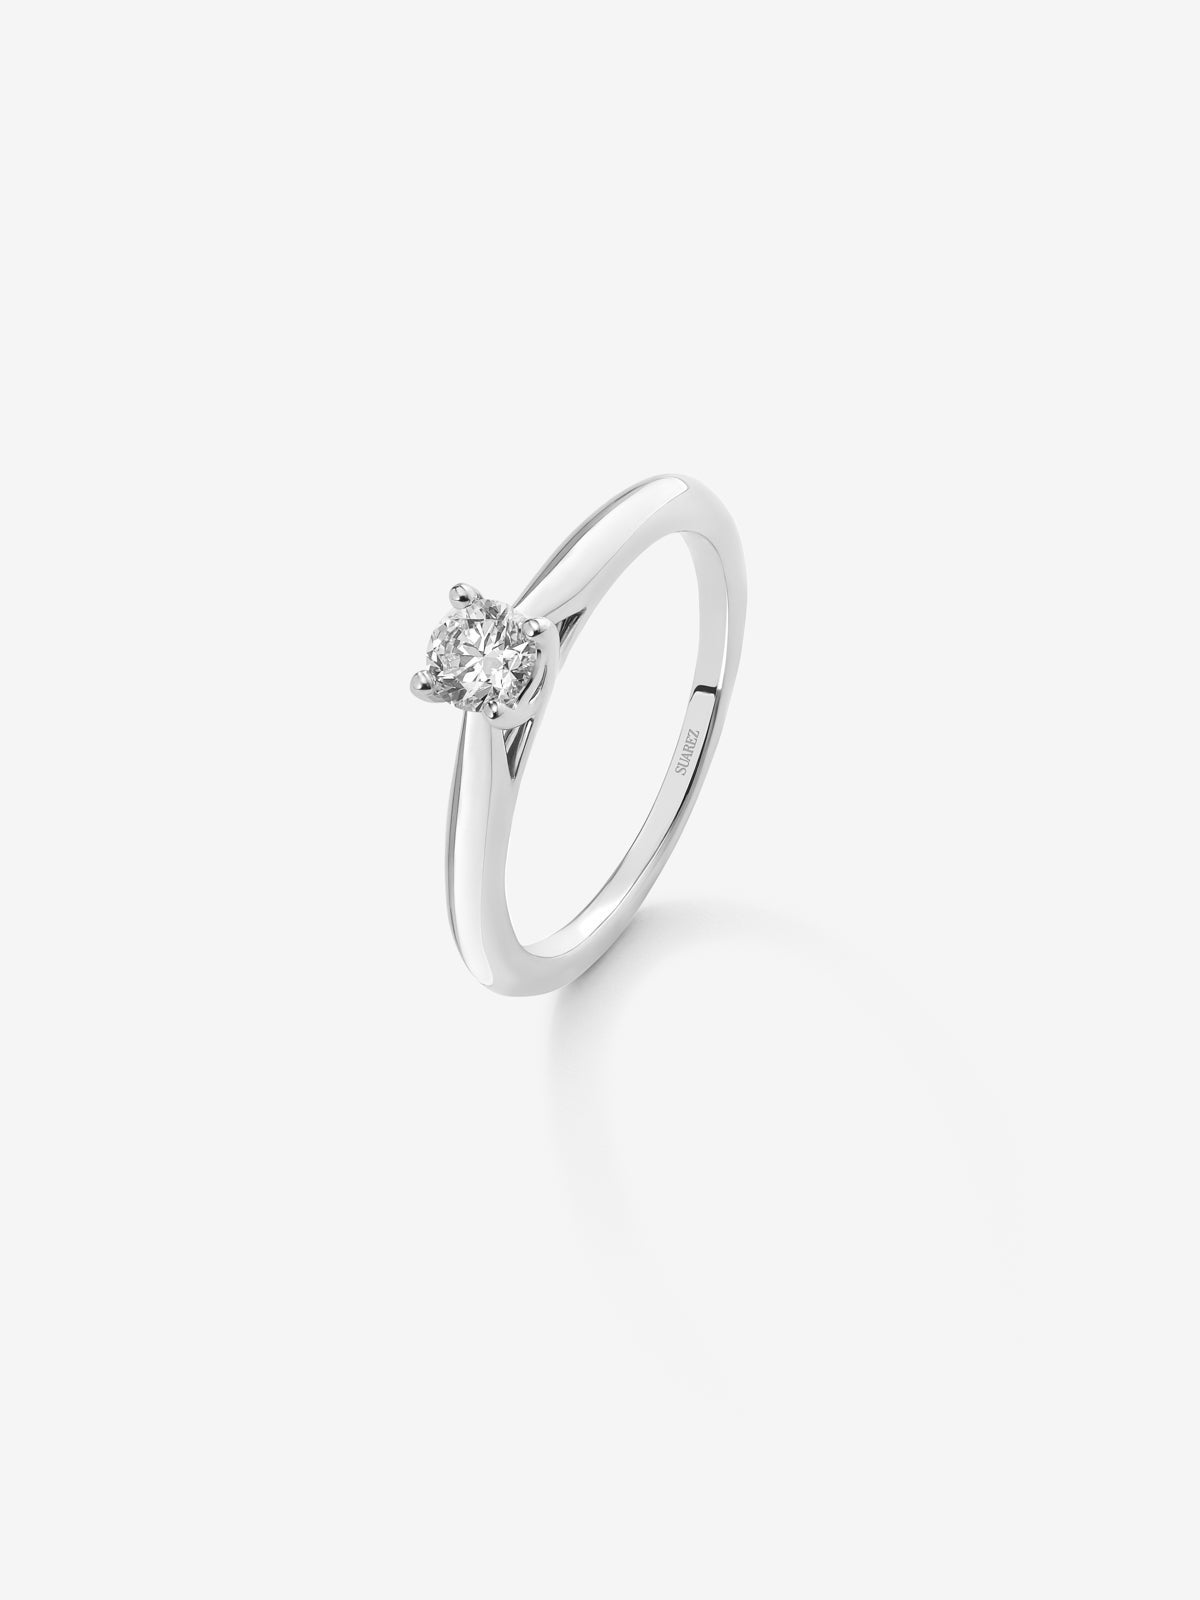 18K white gold solitaire ring with 0.1 ct brilliant cut diamond